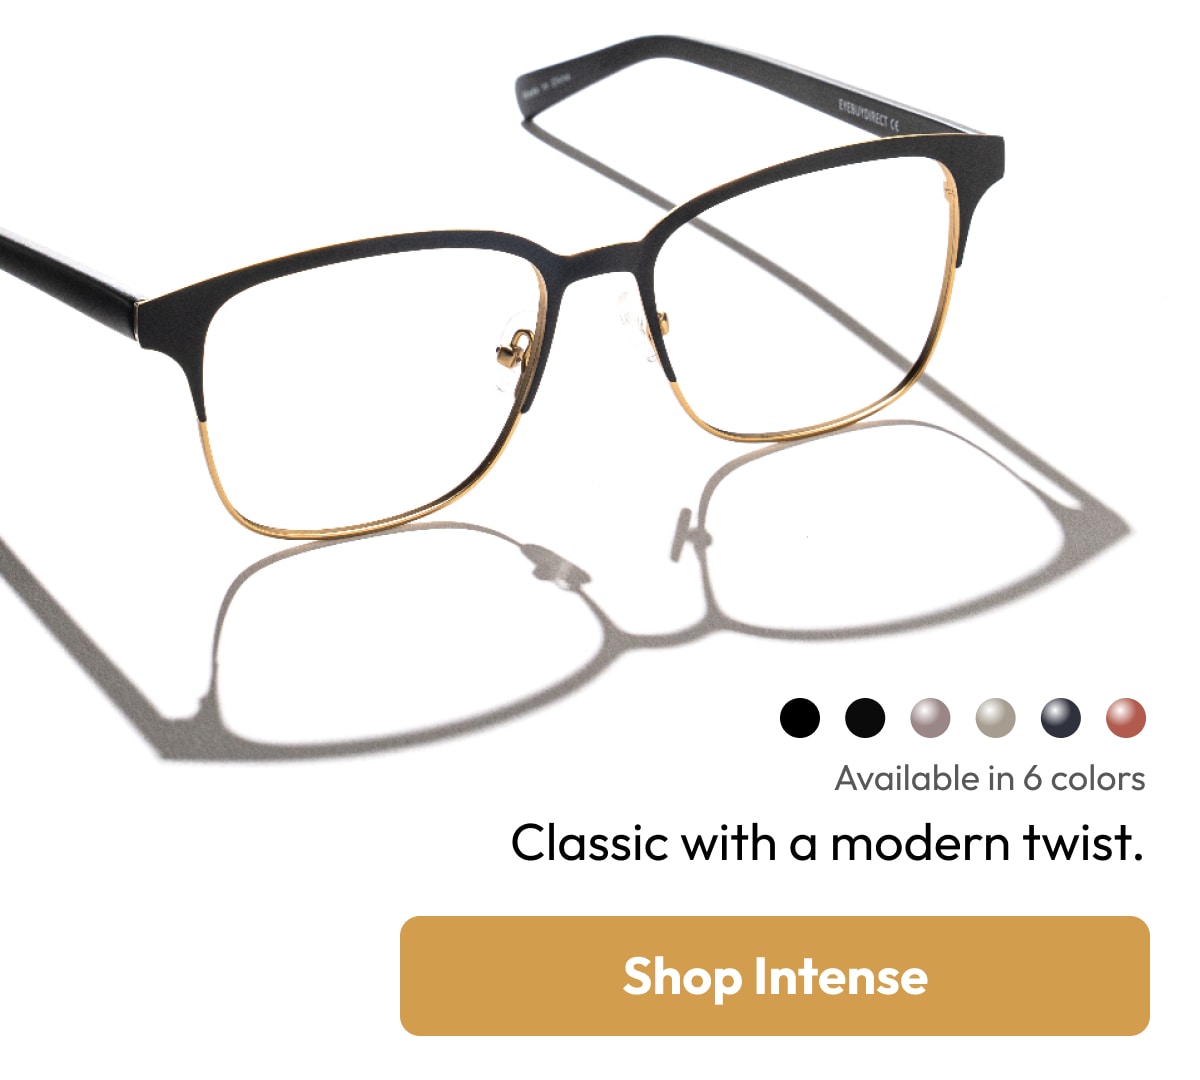  00000 Available in 6 colors Classic with a modern twist. Shop Intense 